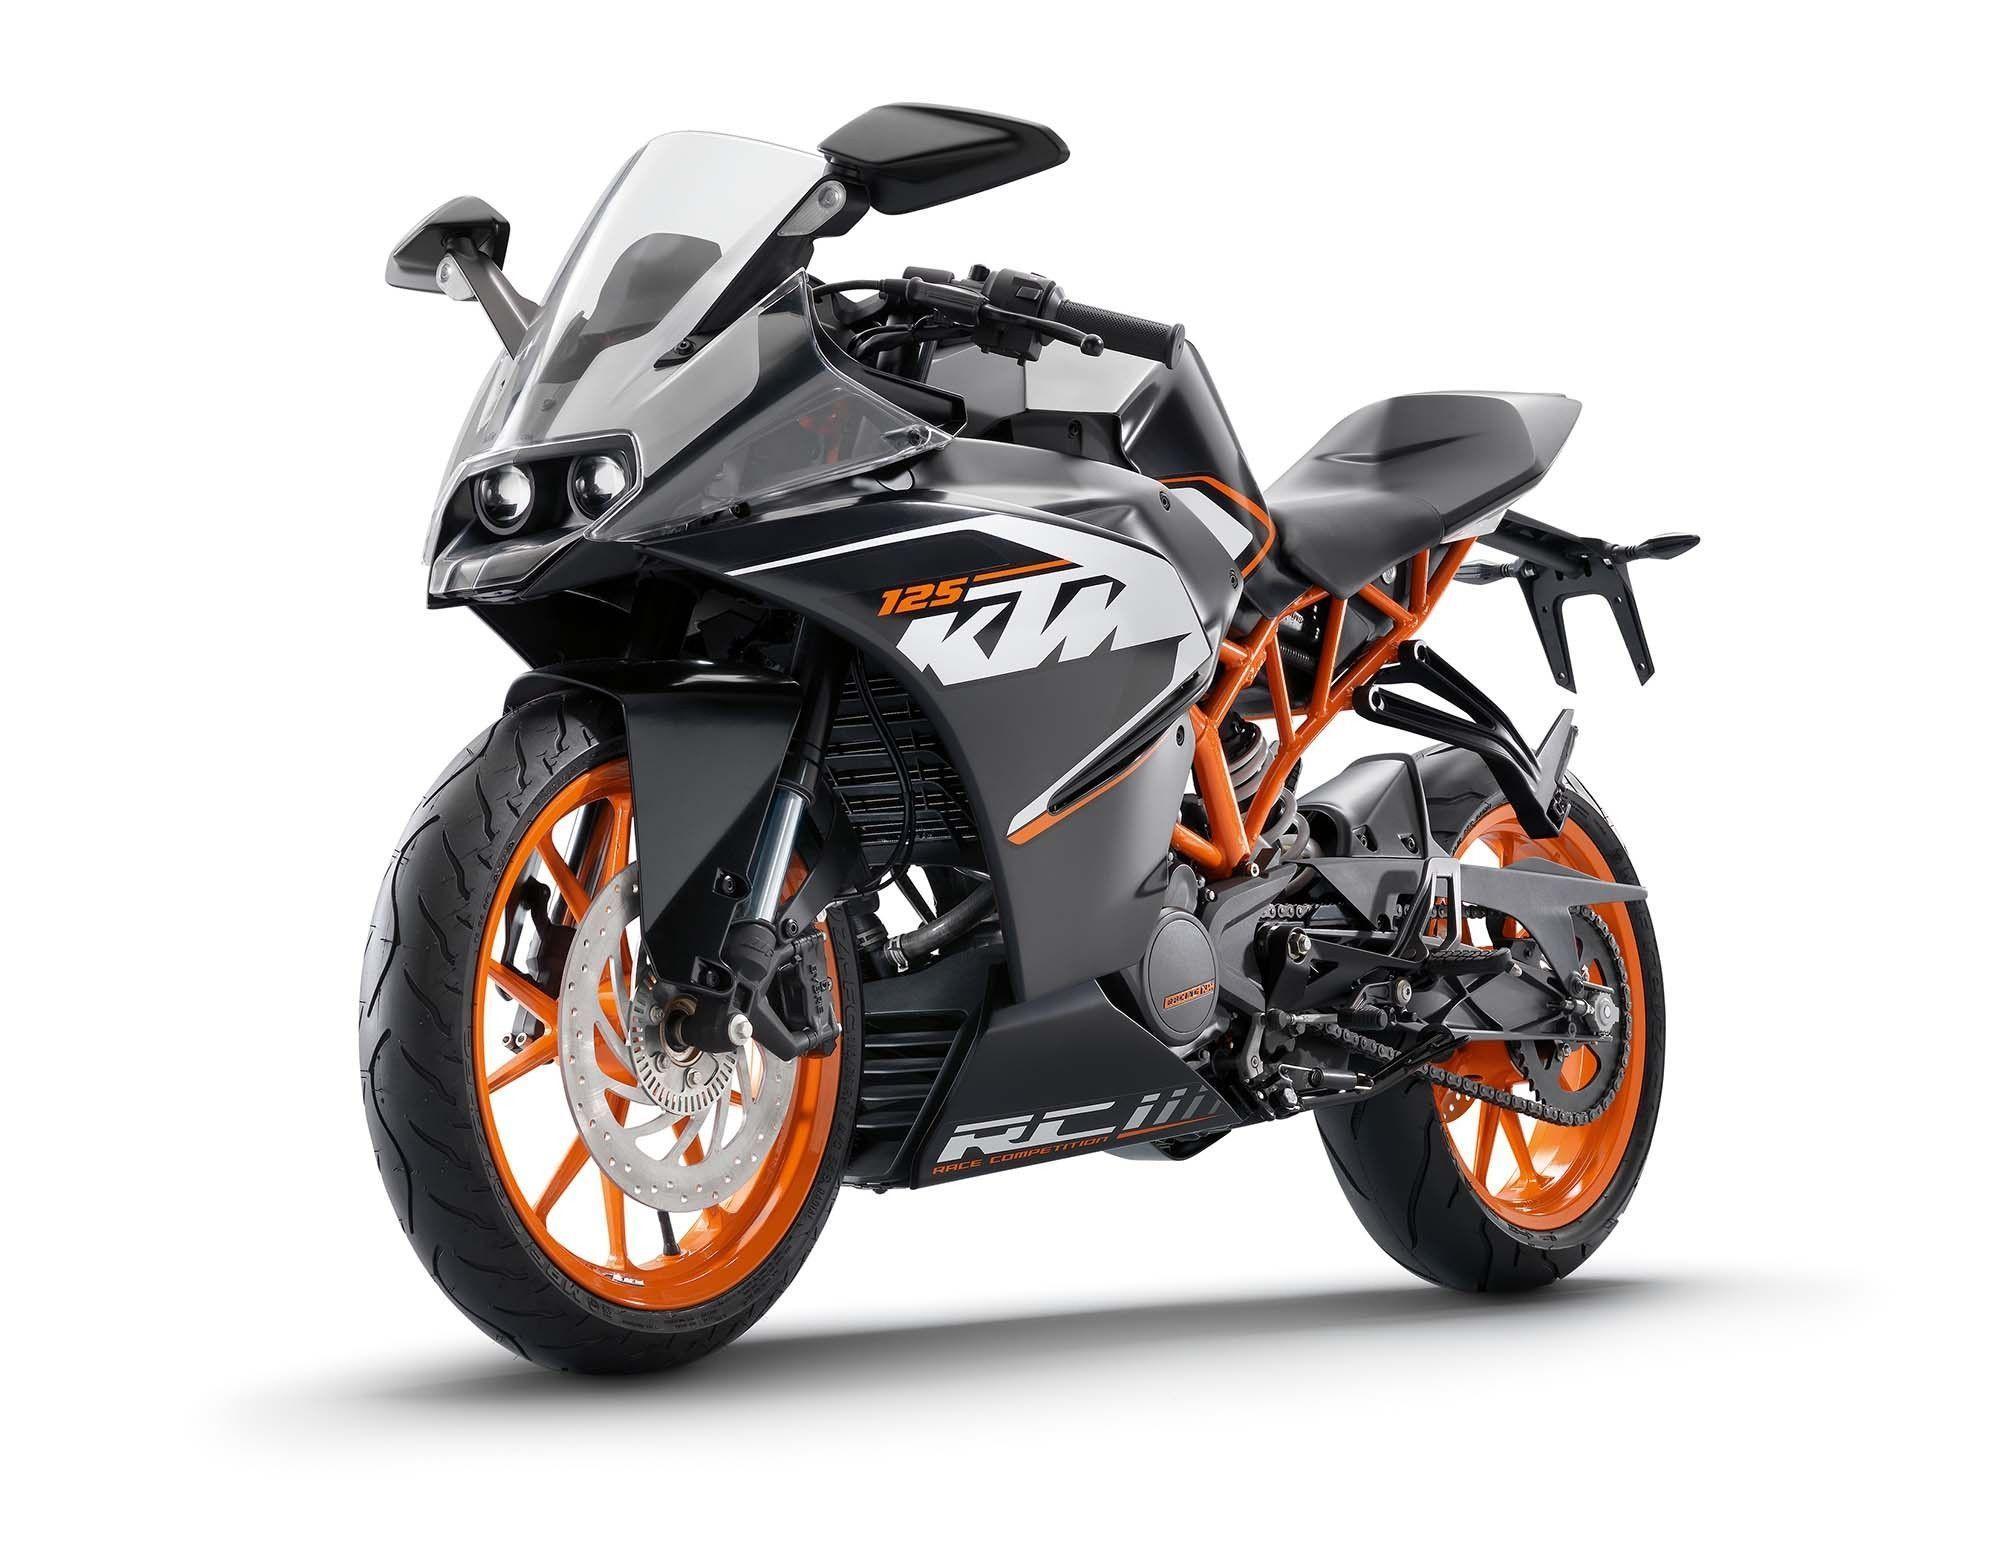 Ktm Rc 125 Price In India Motorcycle Wallpaper